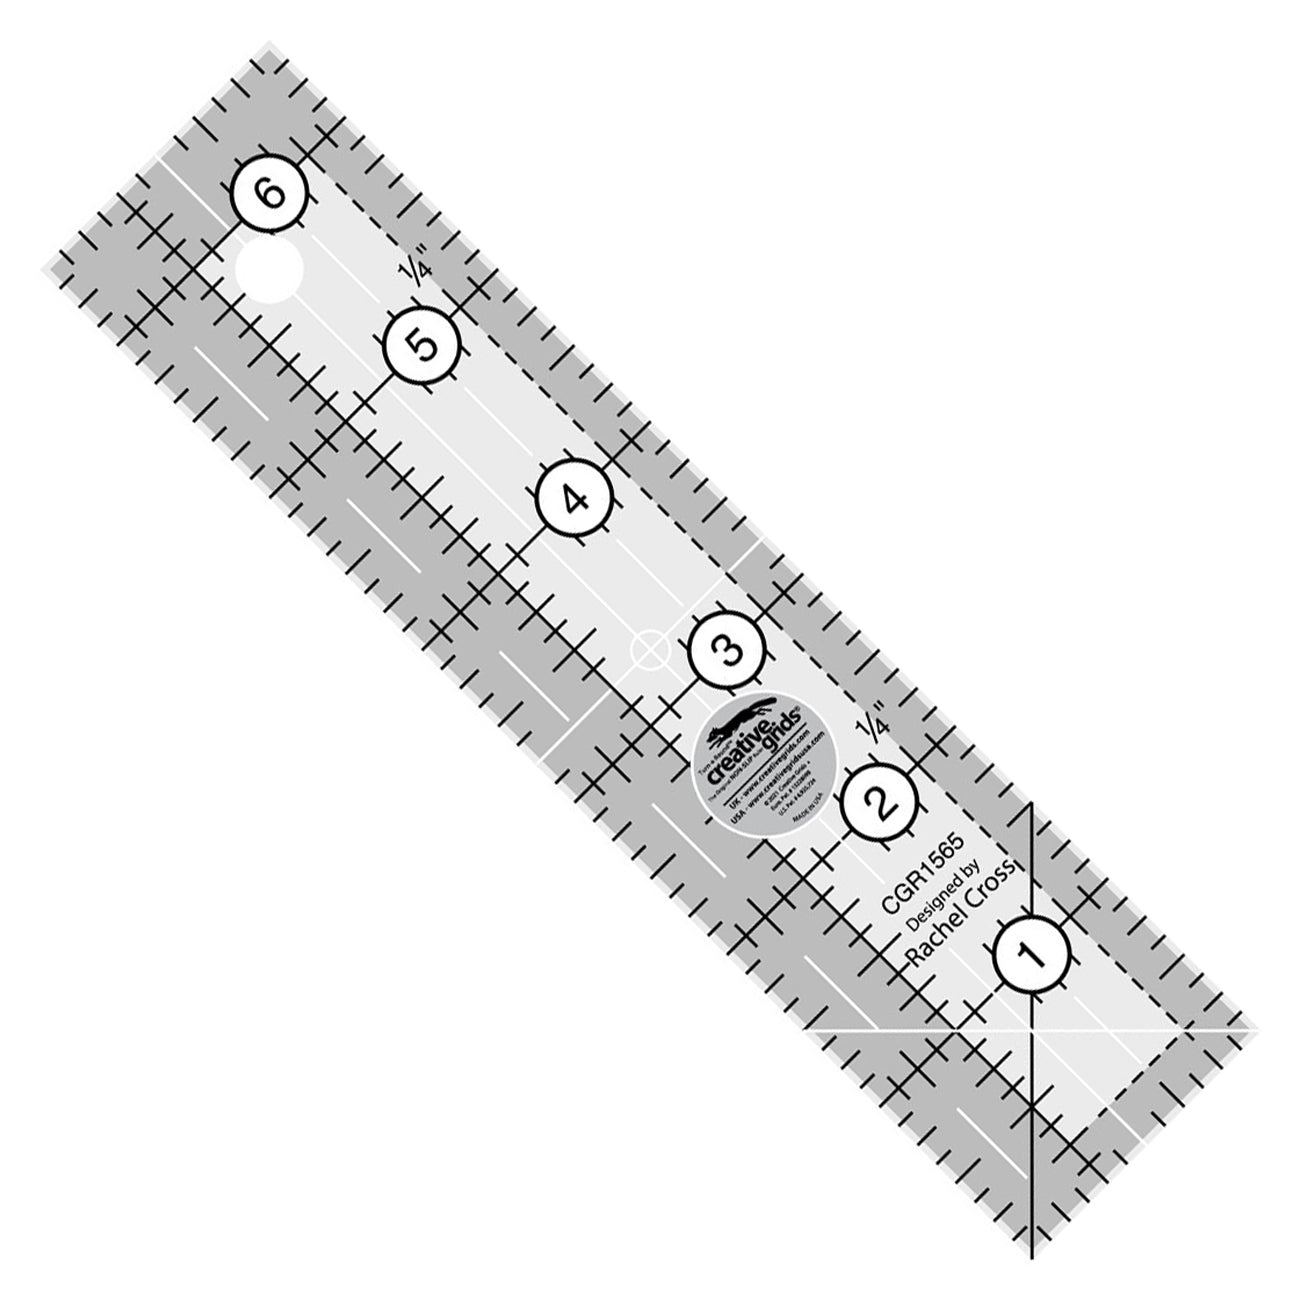 Creative Grids 1-1/2-Inch x 6-1/2-Inch Quilt Ruler (CGR1565)